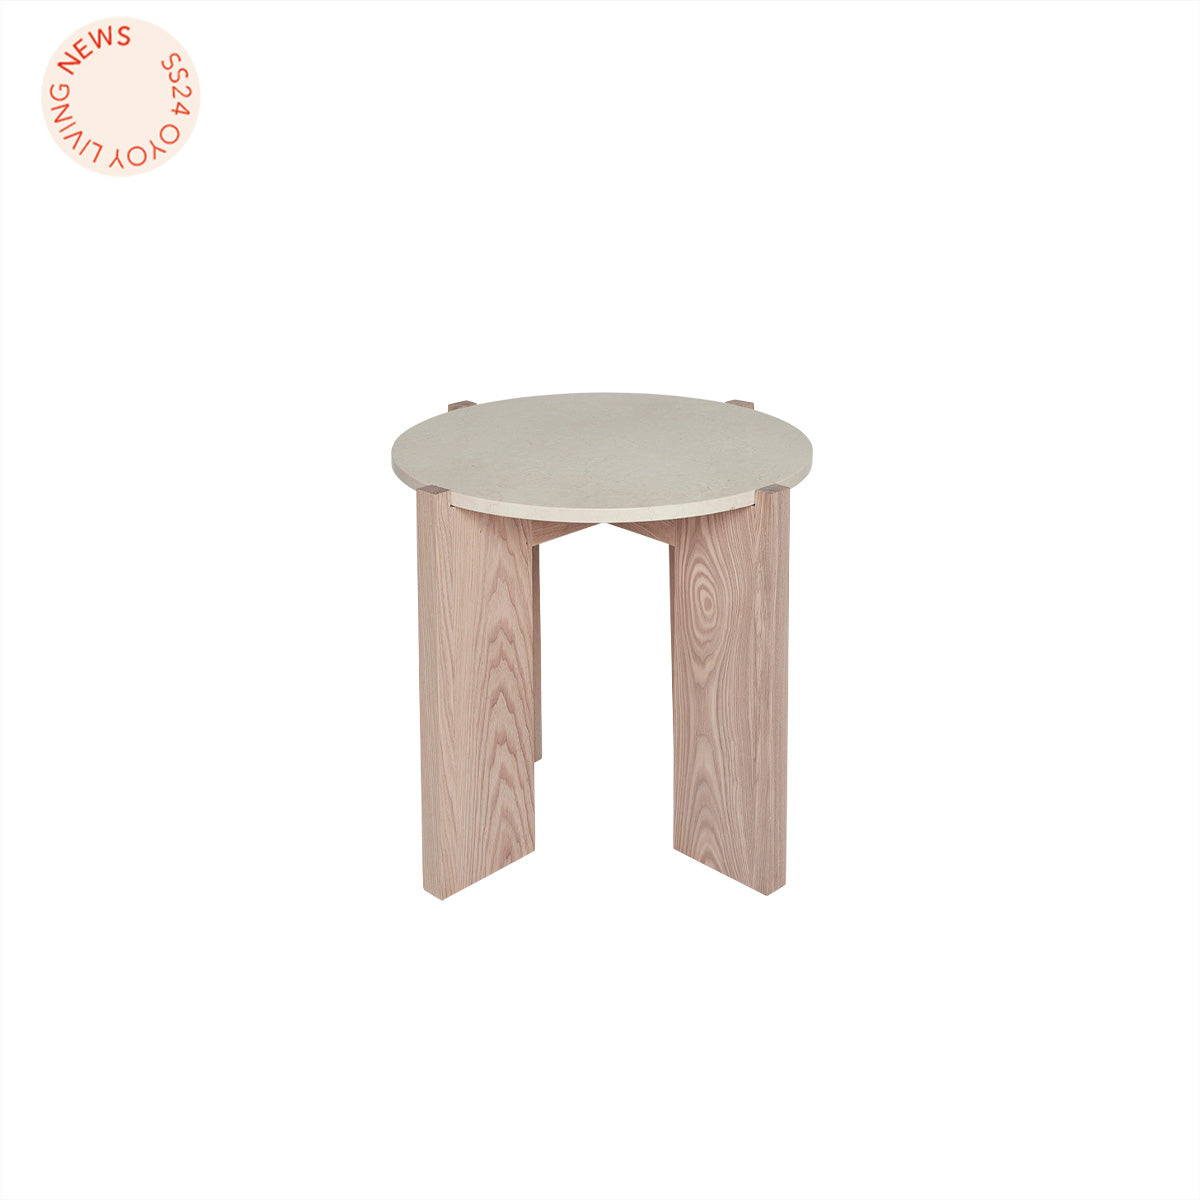 OYOY LIVING Lune Marble Coffee Table - Small Coffee Table 901 Nature / White